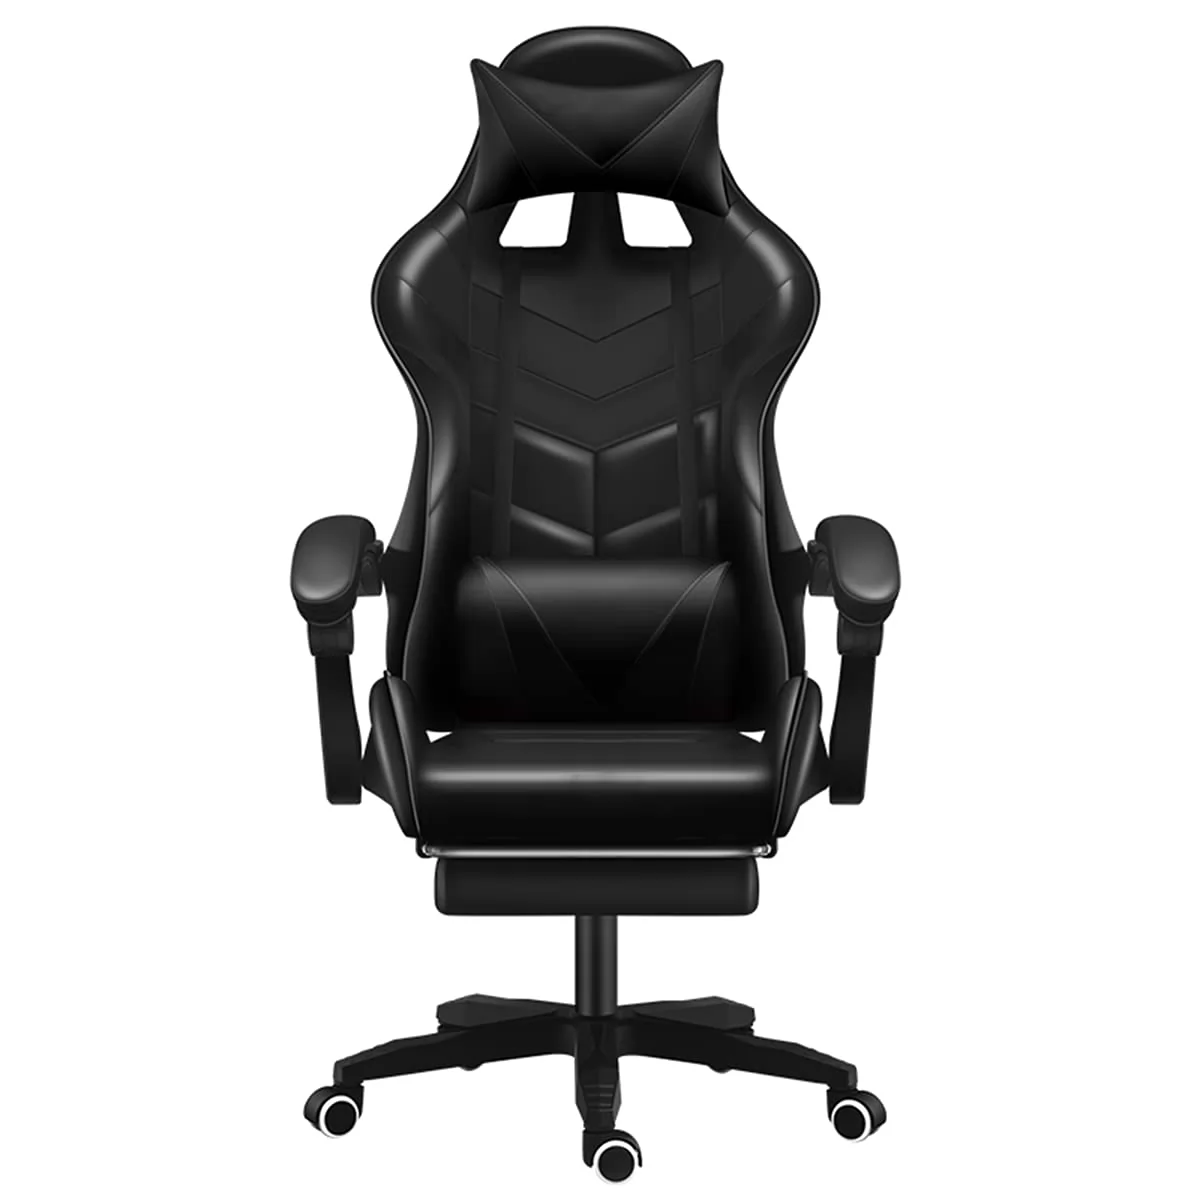  HEERRAV RETAIL PU Leather Gaming Chair with Footrest